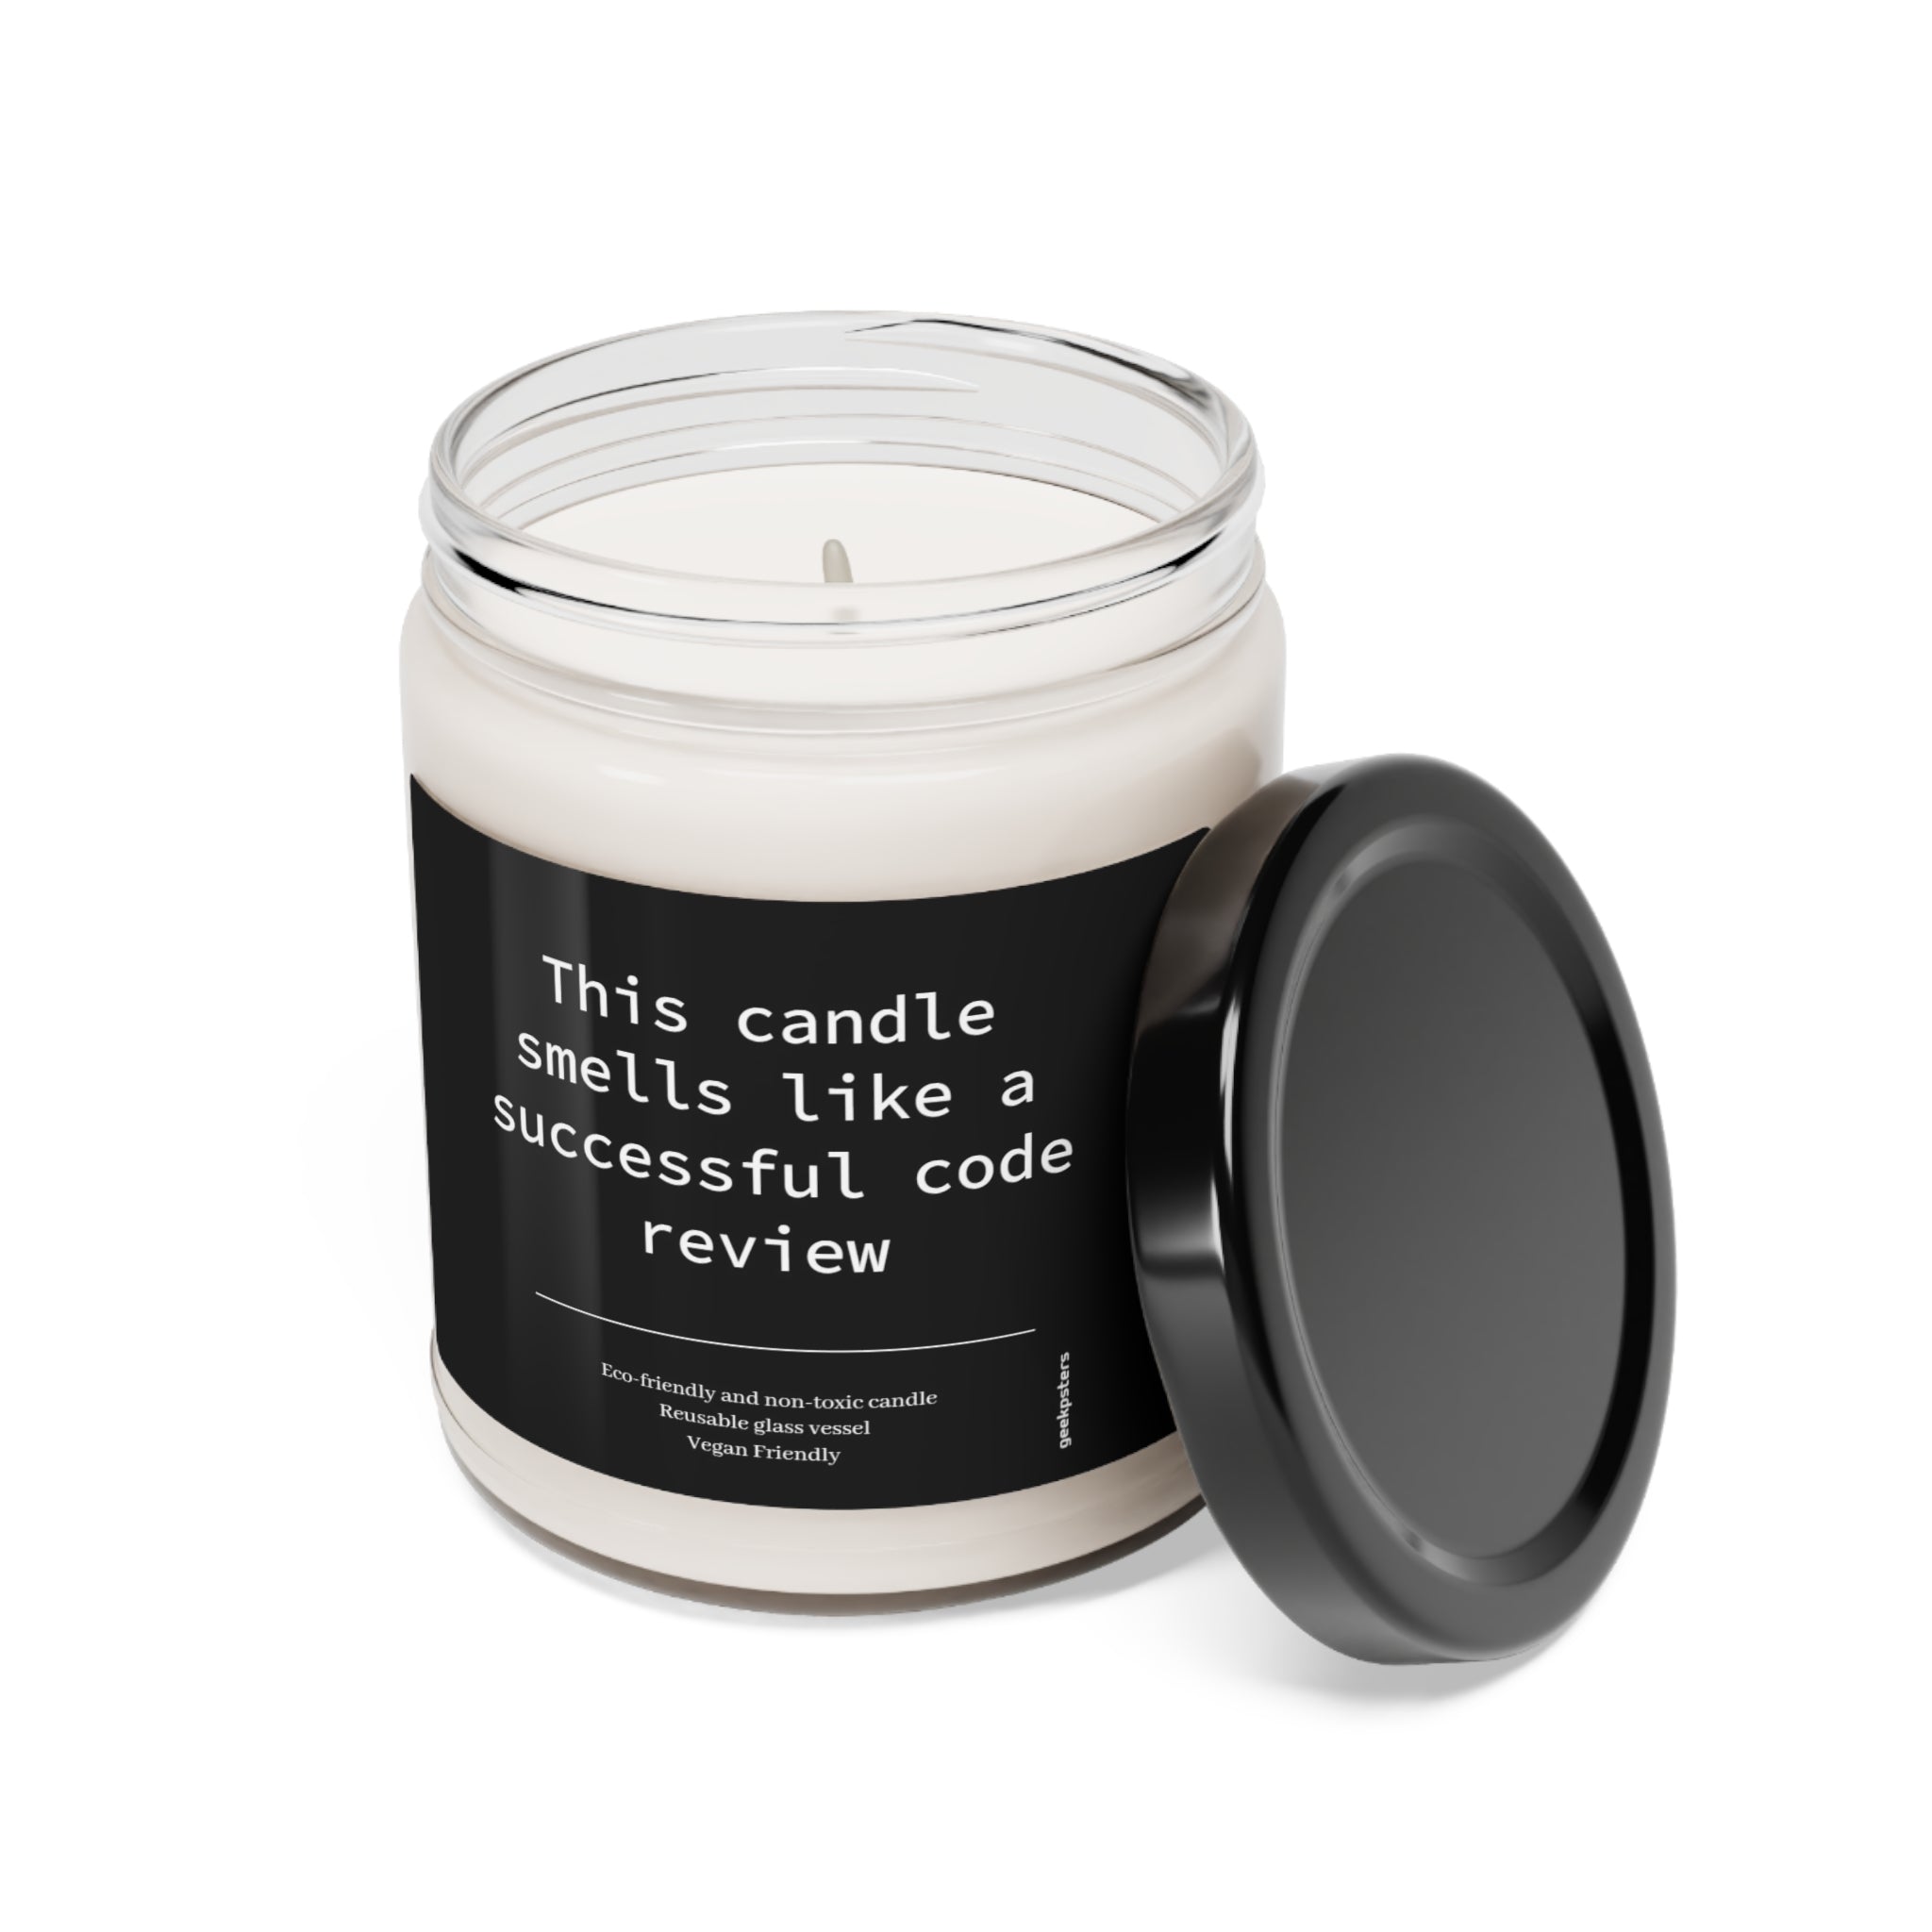 A This Candle Smells Like a Successful Code Review - Scented Soy Candle, 9oz with a humorous label that reads "this candle smells like a successful code review.